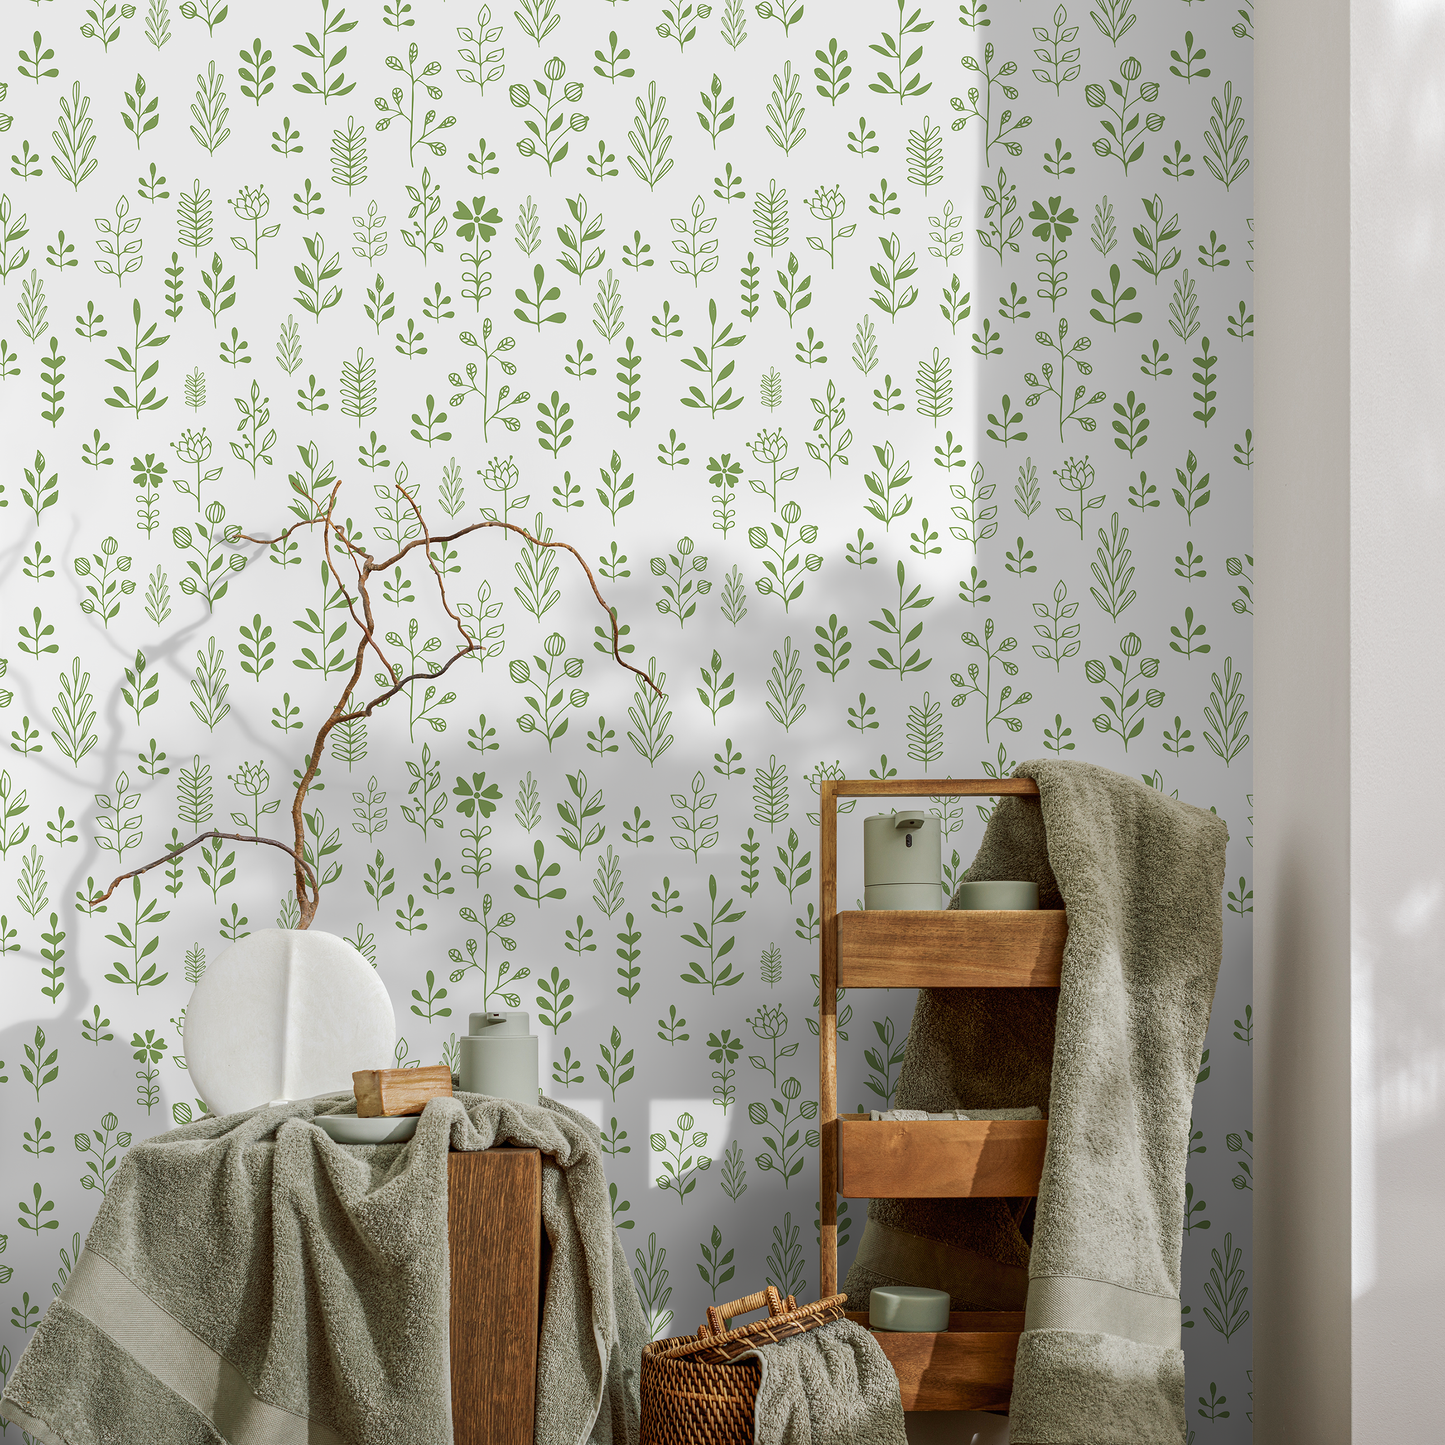 Green Minimalist Leaf Wallpaper Boho Plant Wallpaper Peel and Stick and Traditional Wallpaper - A365